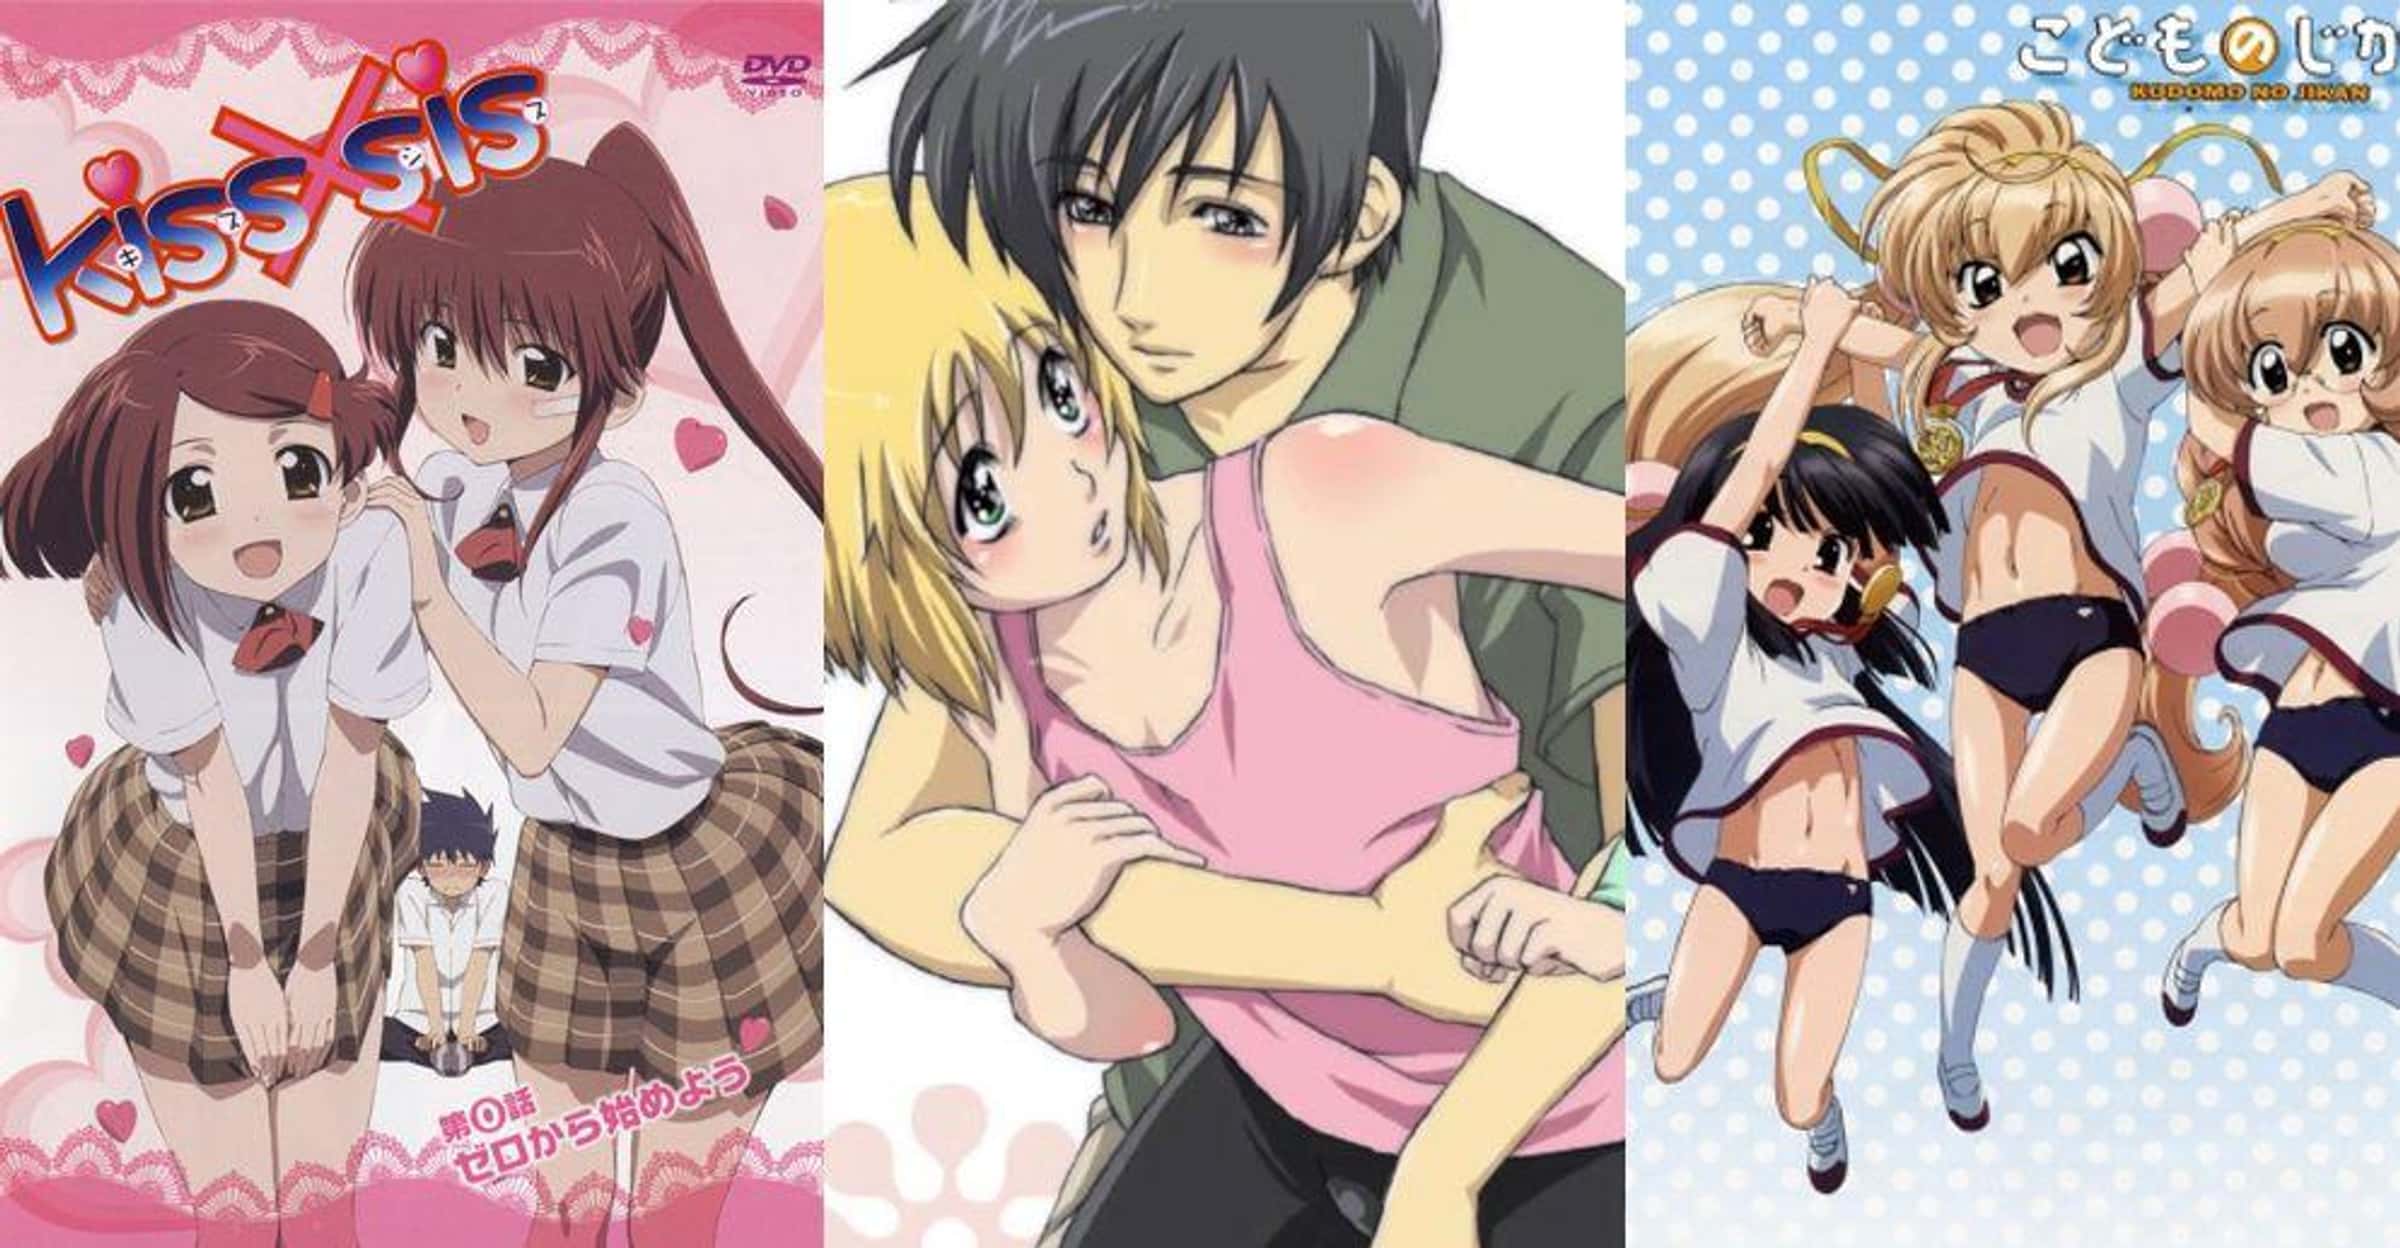 Multiple Anime Girl Hentai Sex - The 16 Disturbing Romantic Anime Relationships of All Time